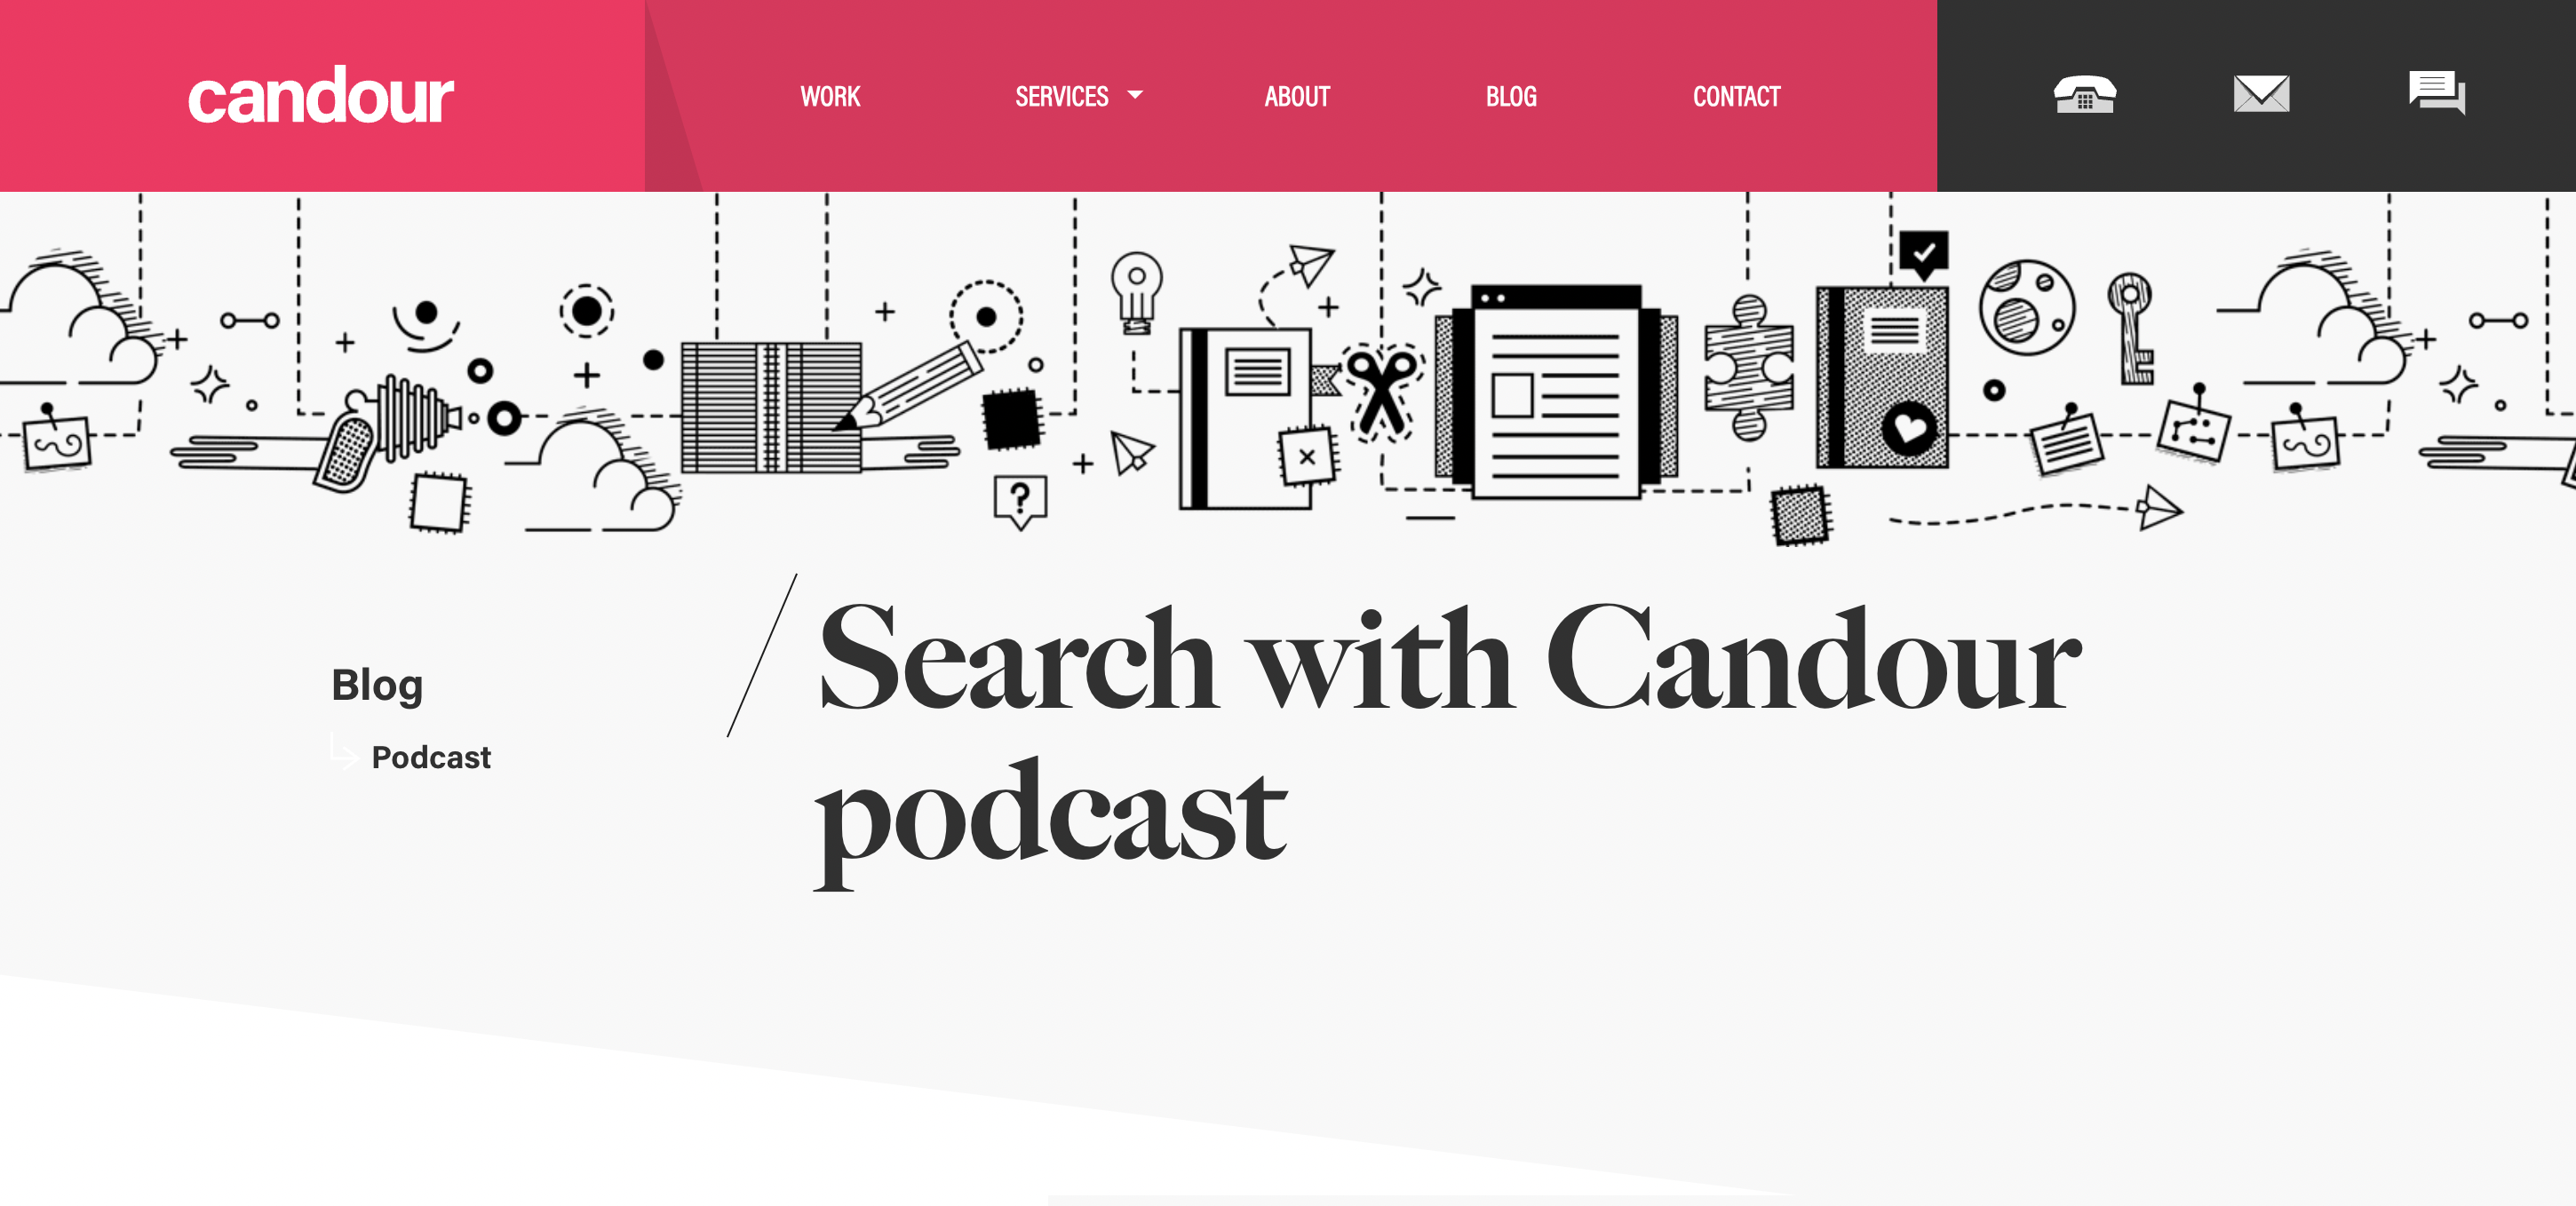 Search with Candour Podcast